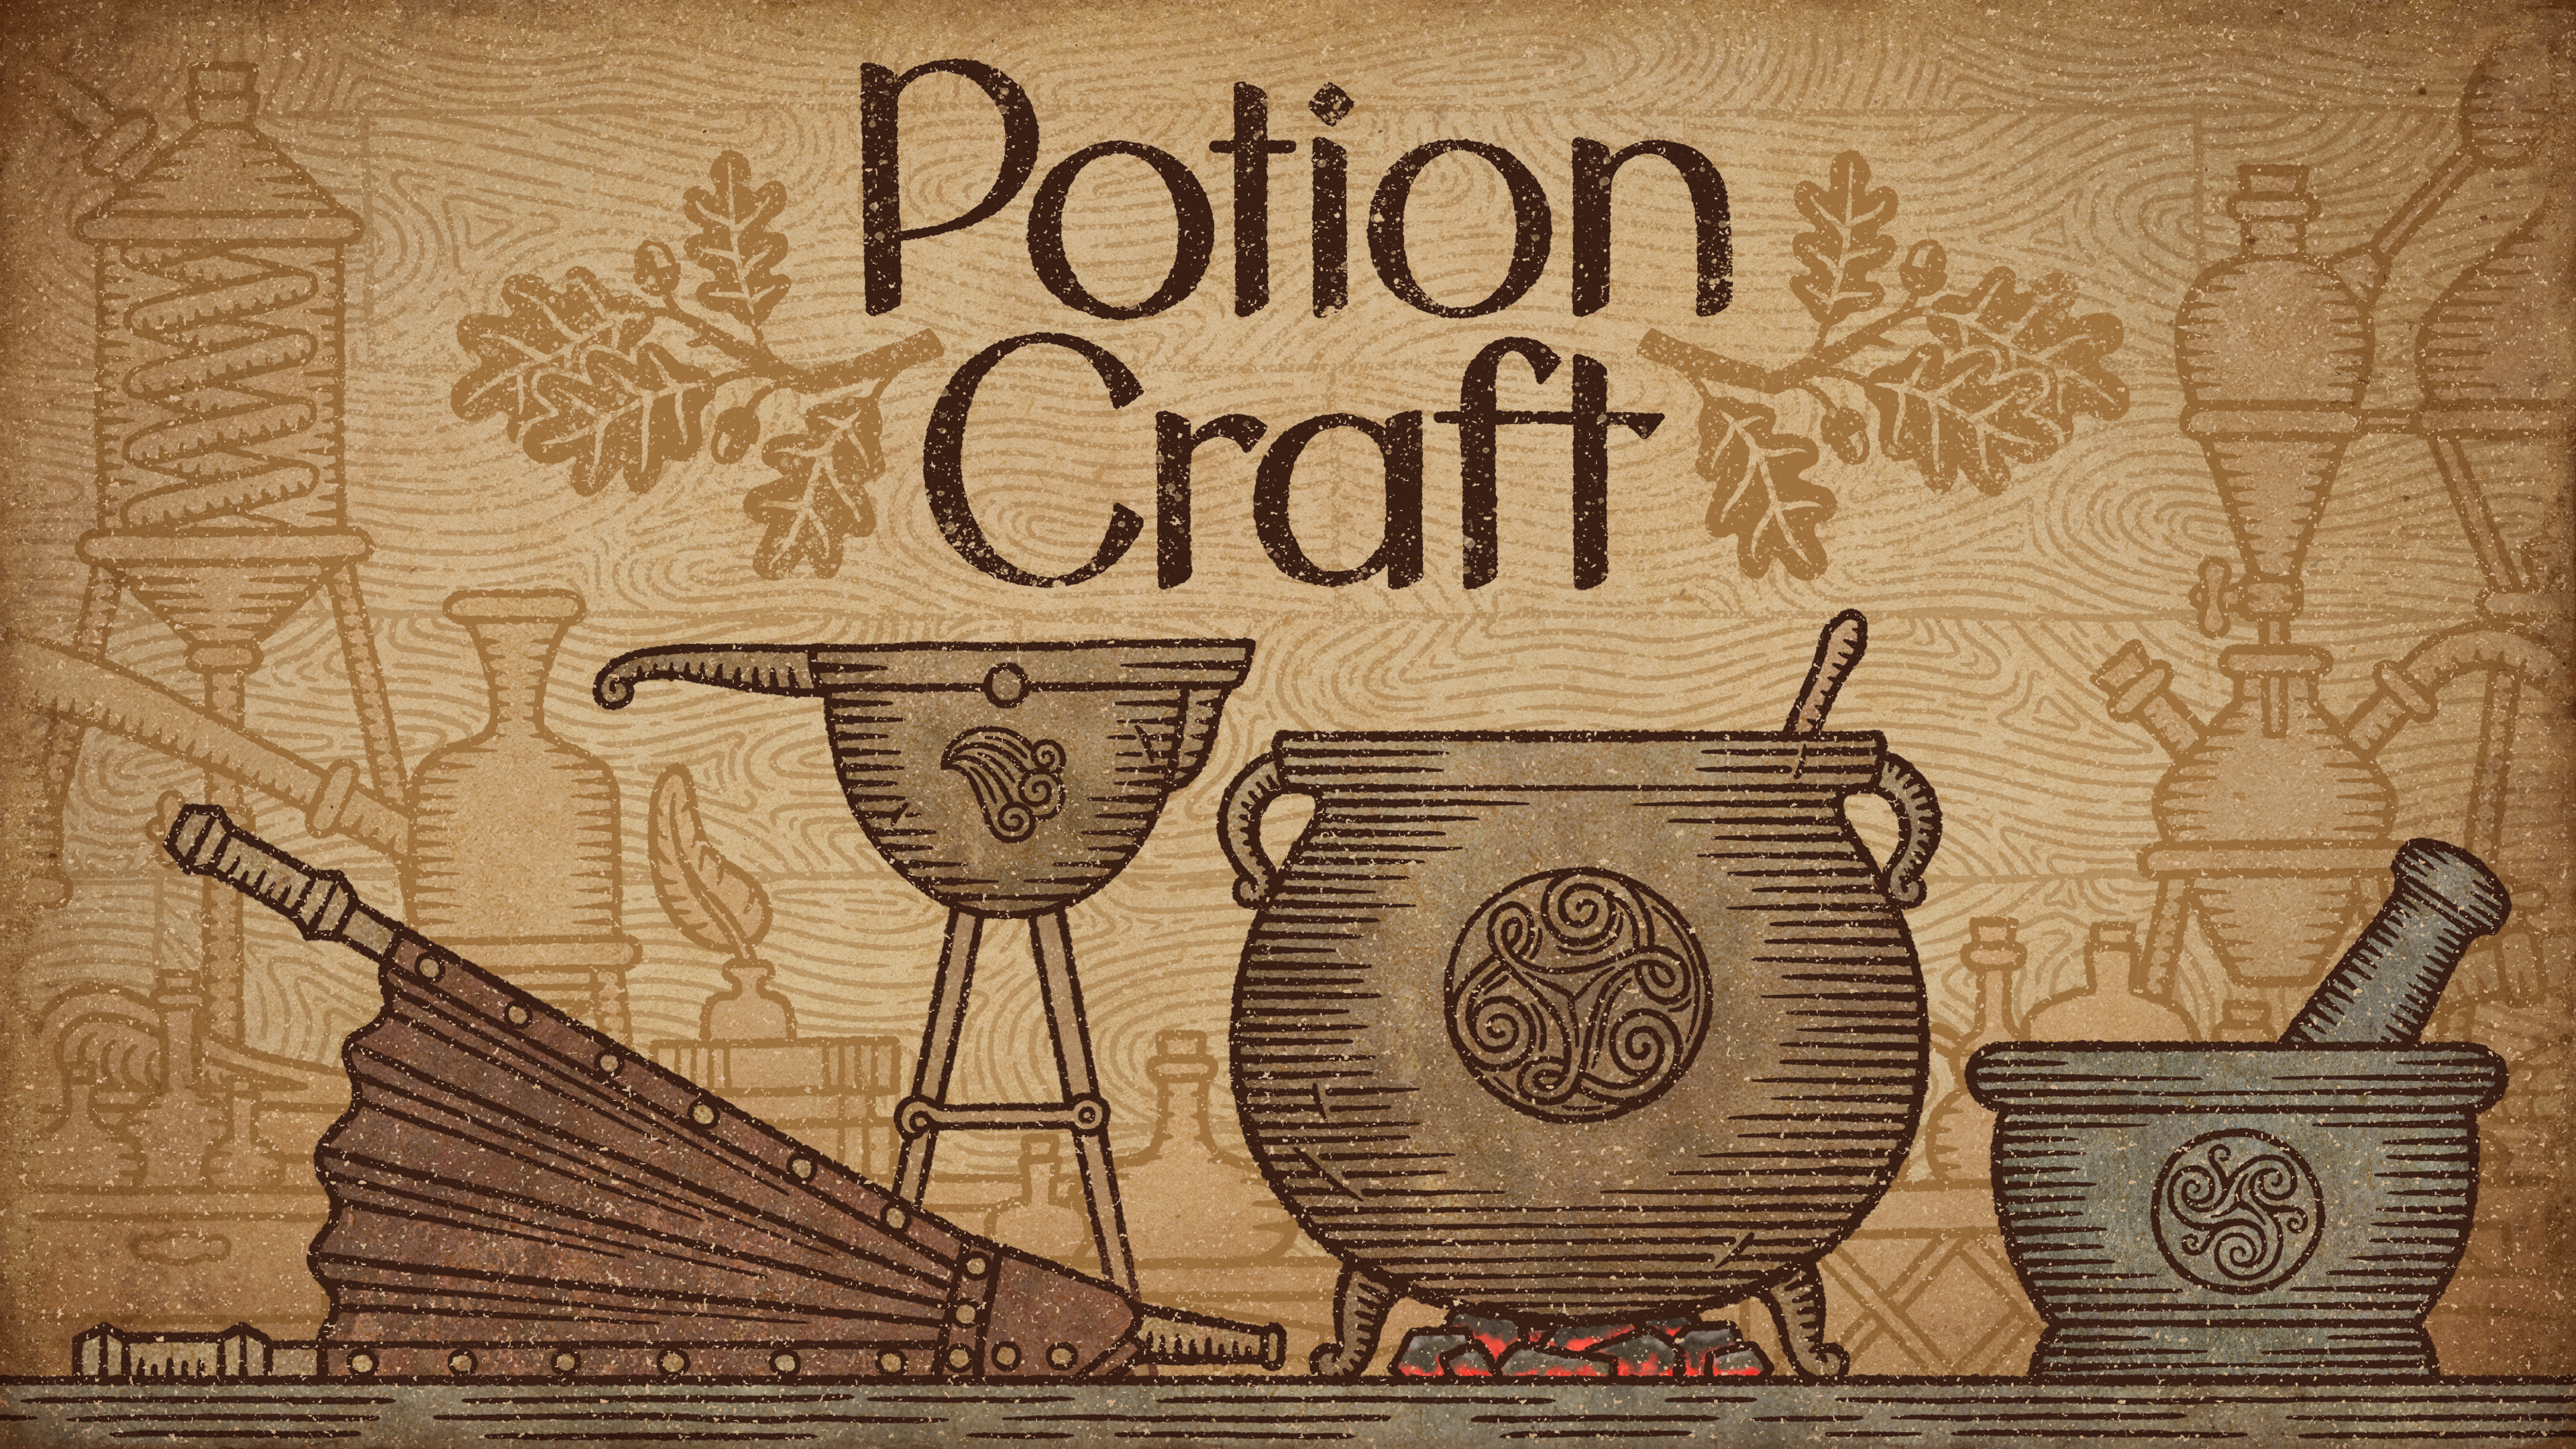 HD desktop wallpaper featuring illustrated alchemy equipment with the title 'Potion Craft: Alchemist Simulator' in a stylized, medieval script on a textured background.